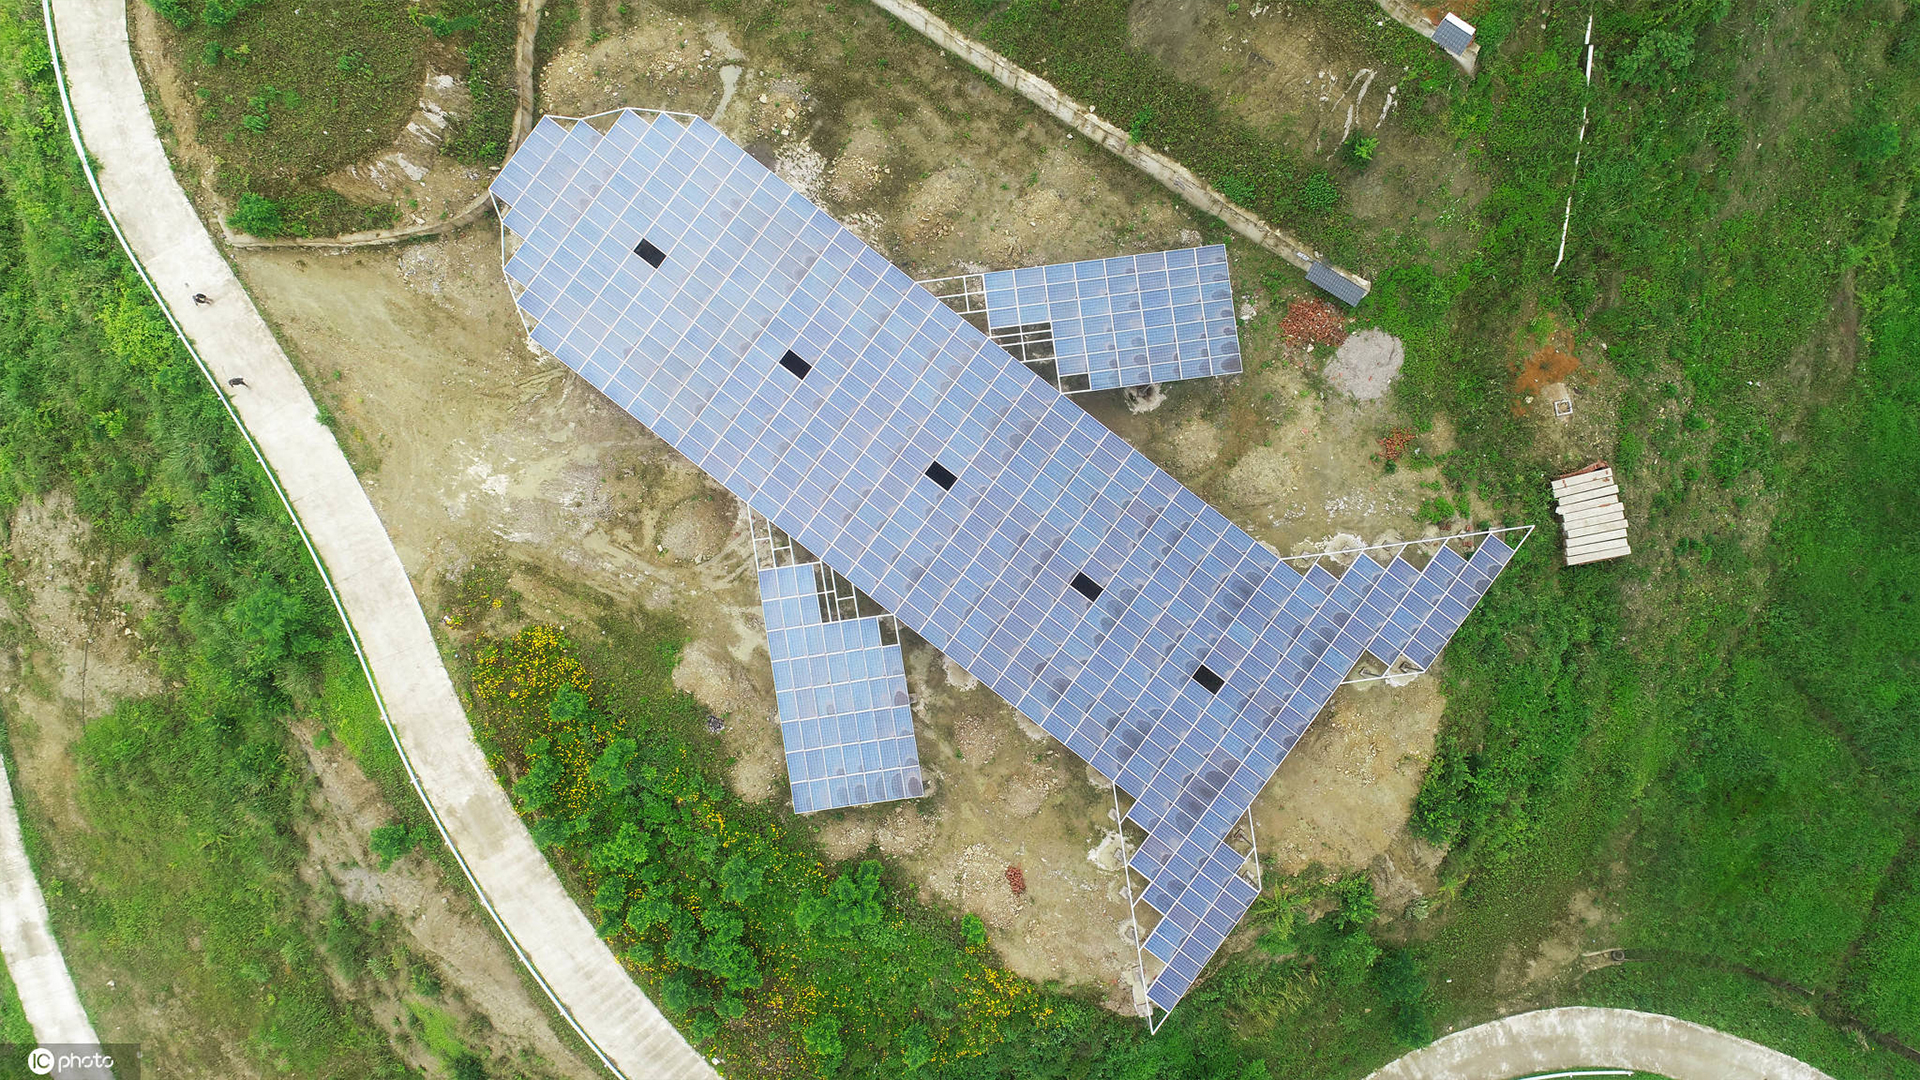 %22Airplane%22 Solar Power Station in Liangping District, Chongqing